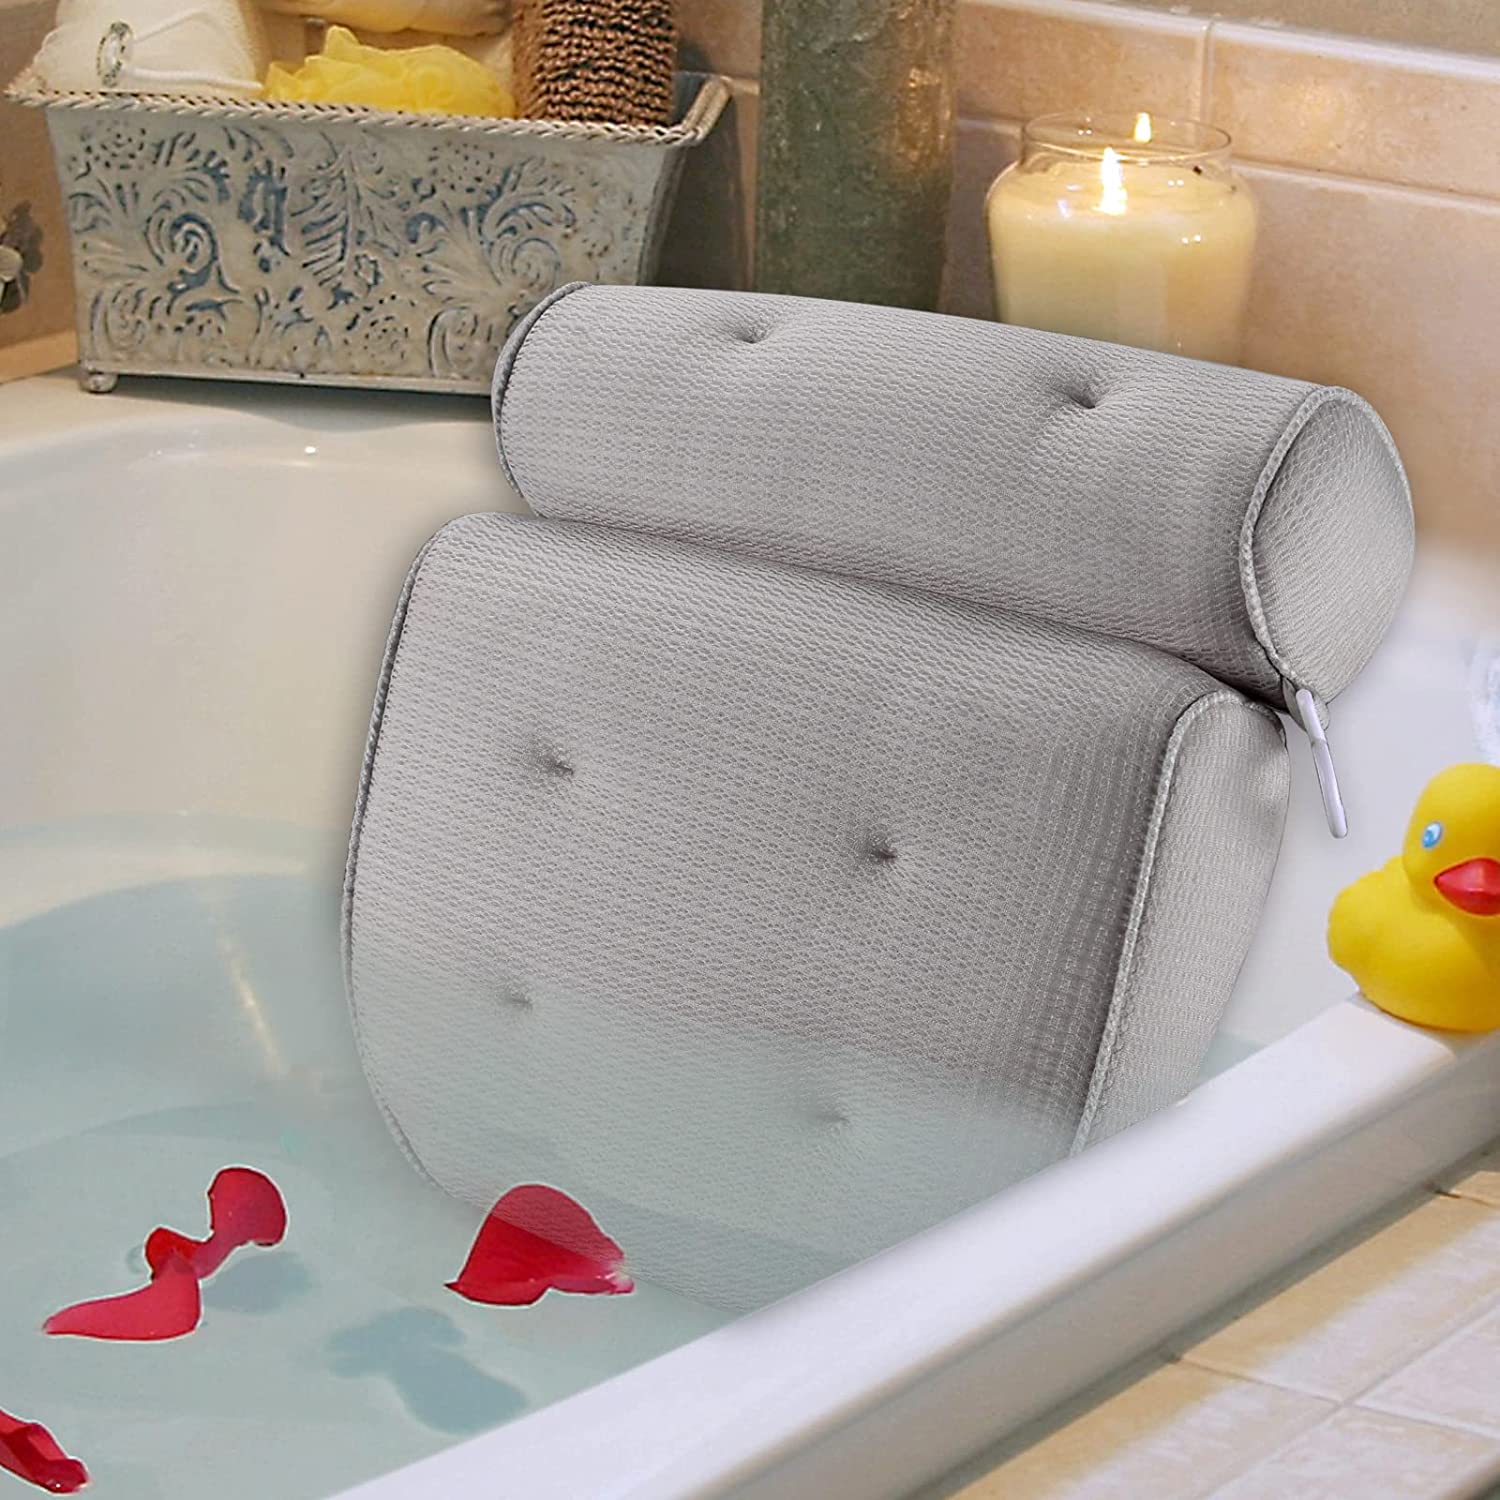 Top Reasons For Using Bath Pillows For Tub Neck And Back Support